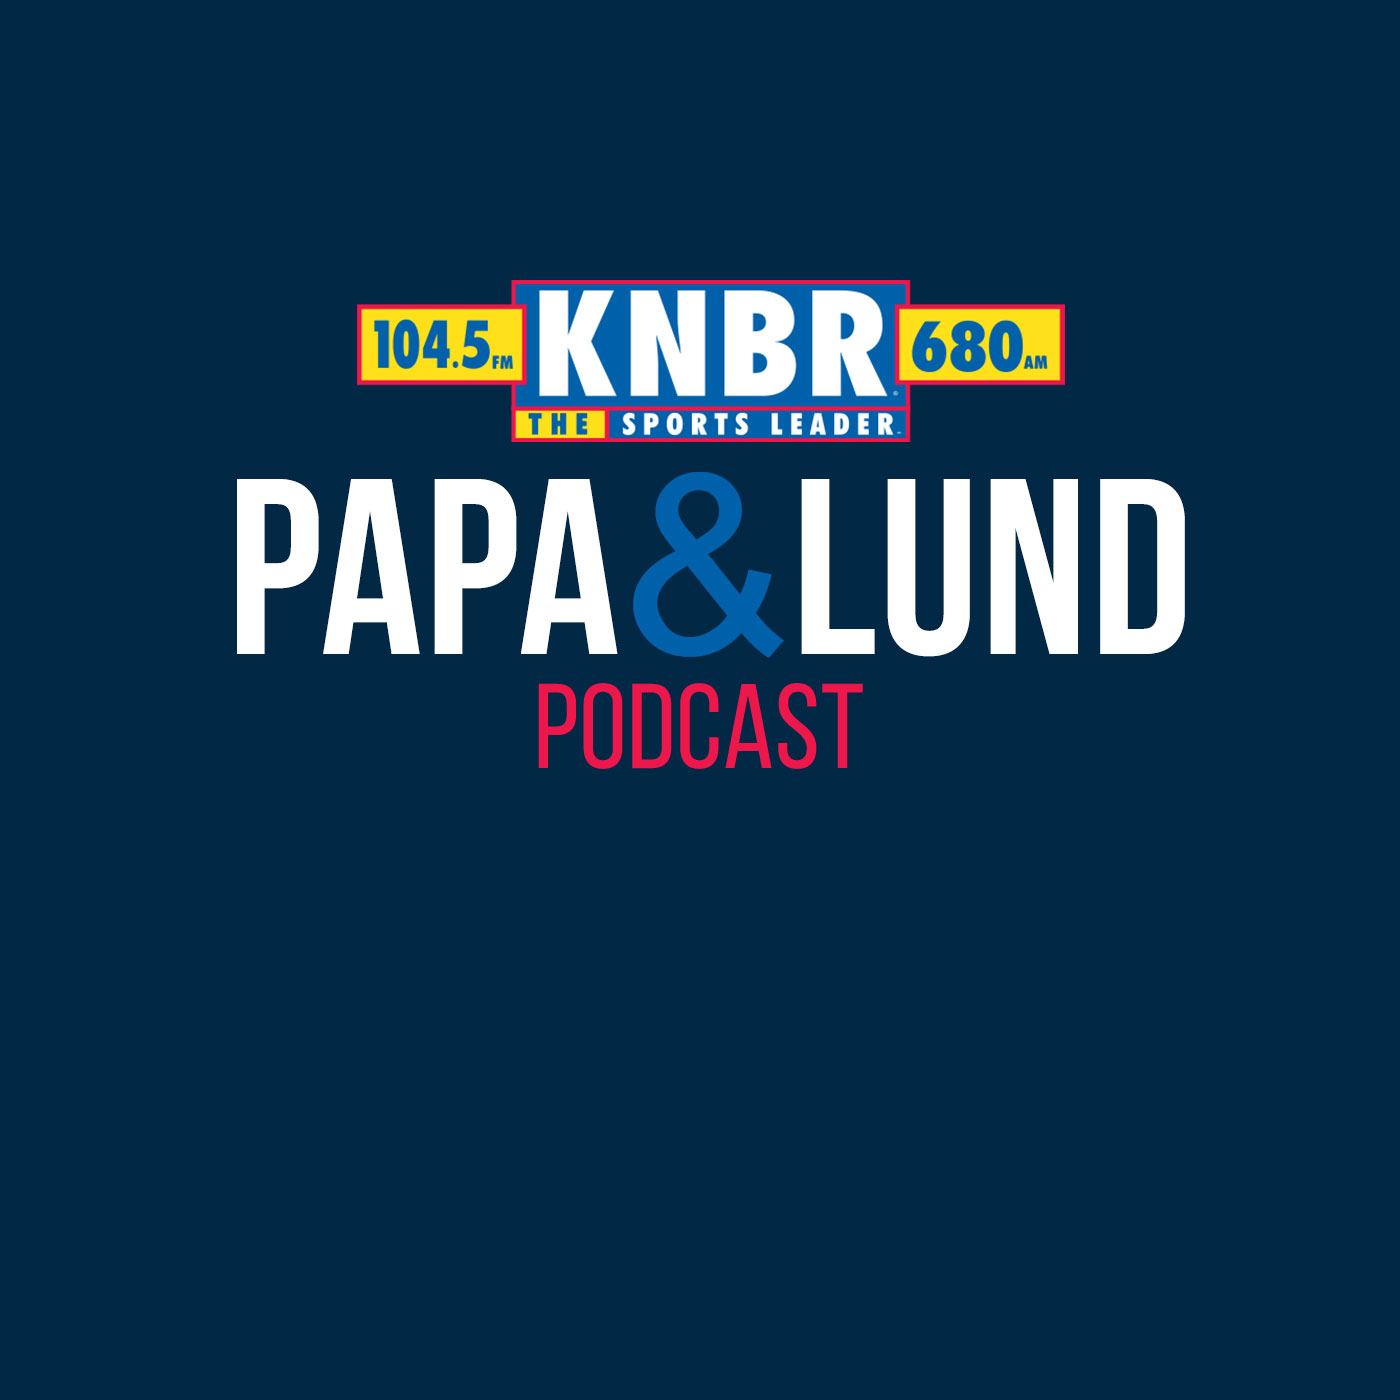 10-5 Michael Gehlken joins Papa and Lund to gives us insight on the Cowboys and what challenges they could pose to the 49ers